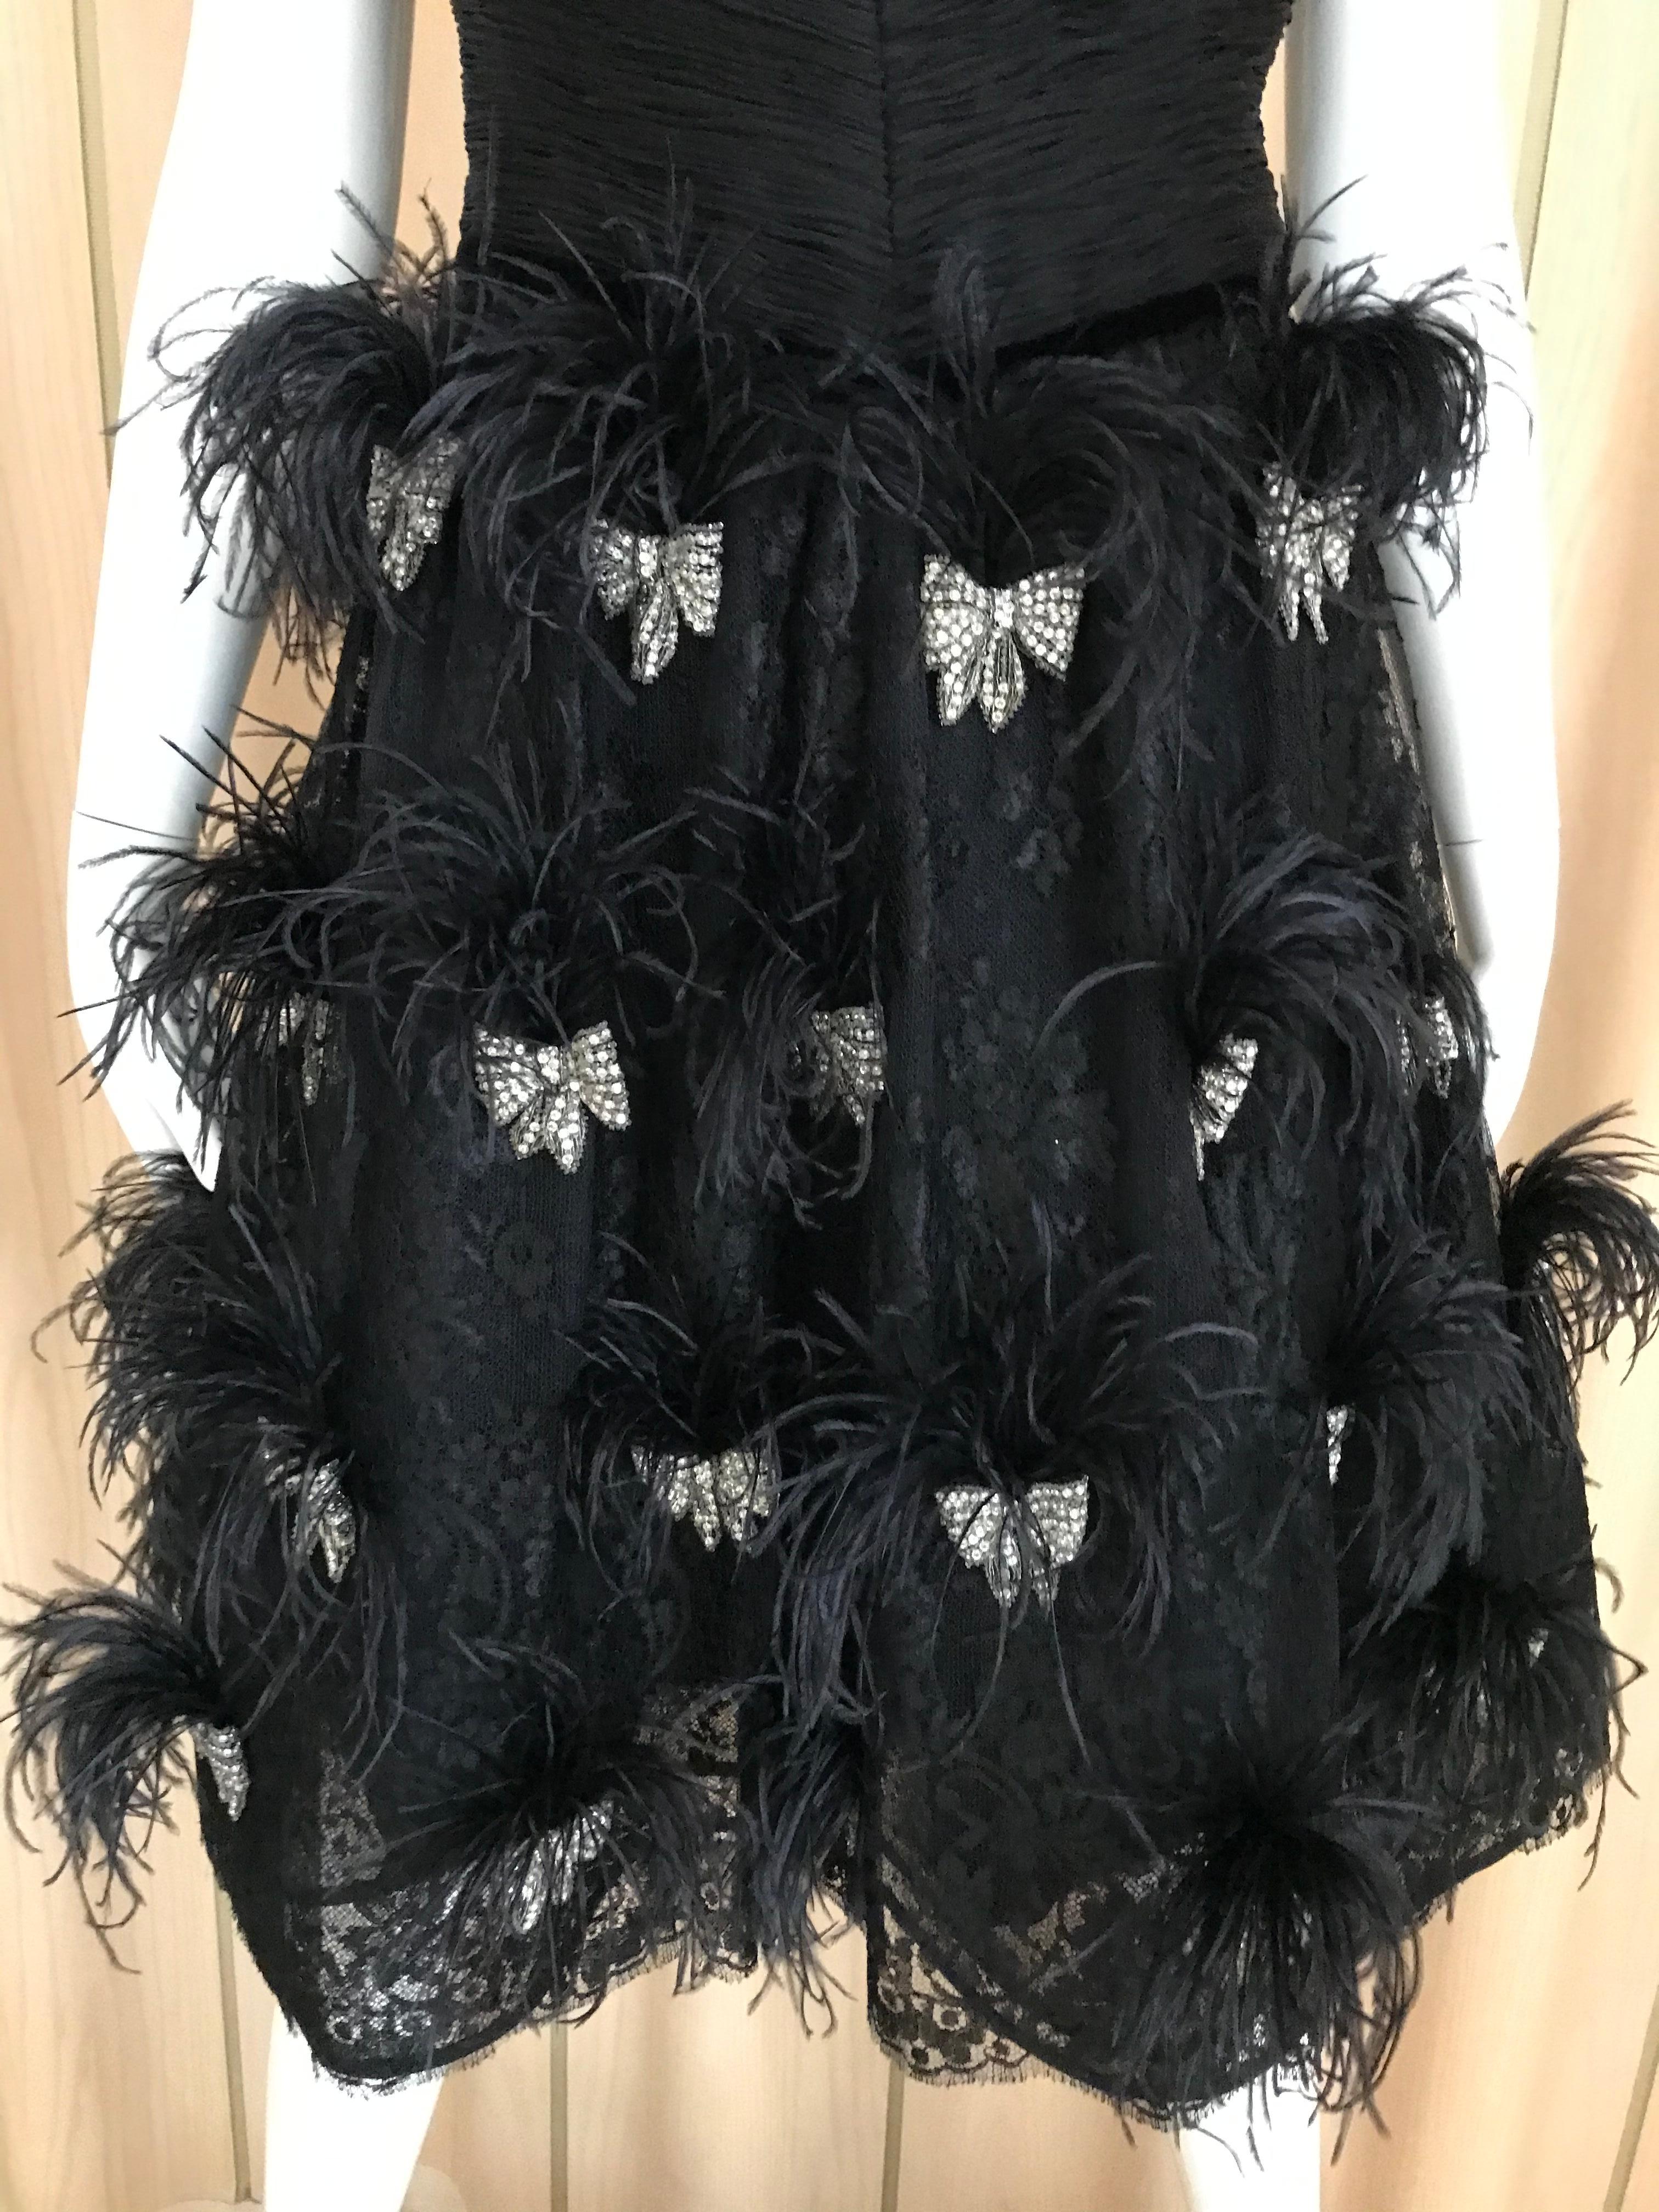 Sexy and Fun Black Silk VALENTINO COUTURE spaghetti strap cocktail dress with ostrich plume.
Bust: 36 inches/ Waist: 30 inches/ Dress length: 38 inches